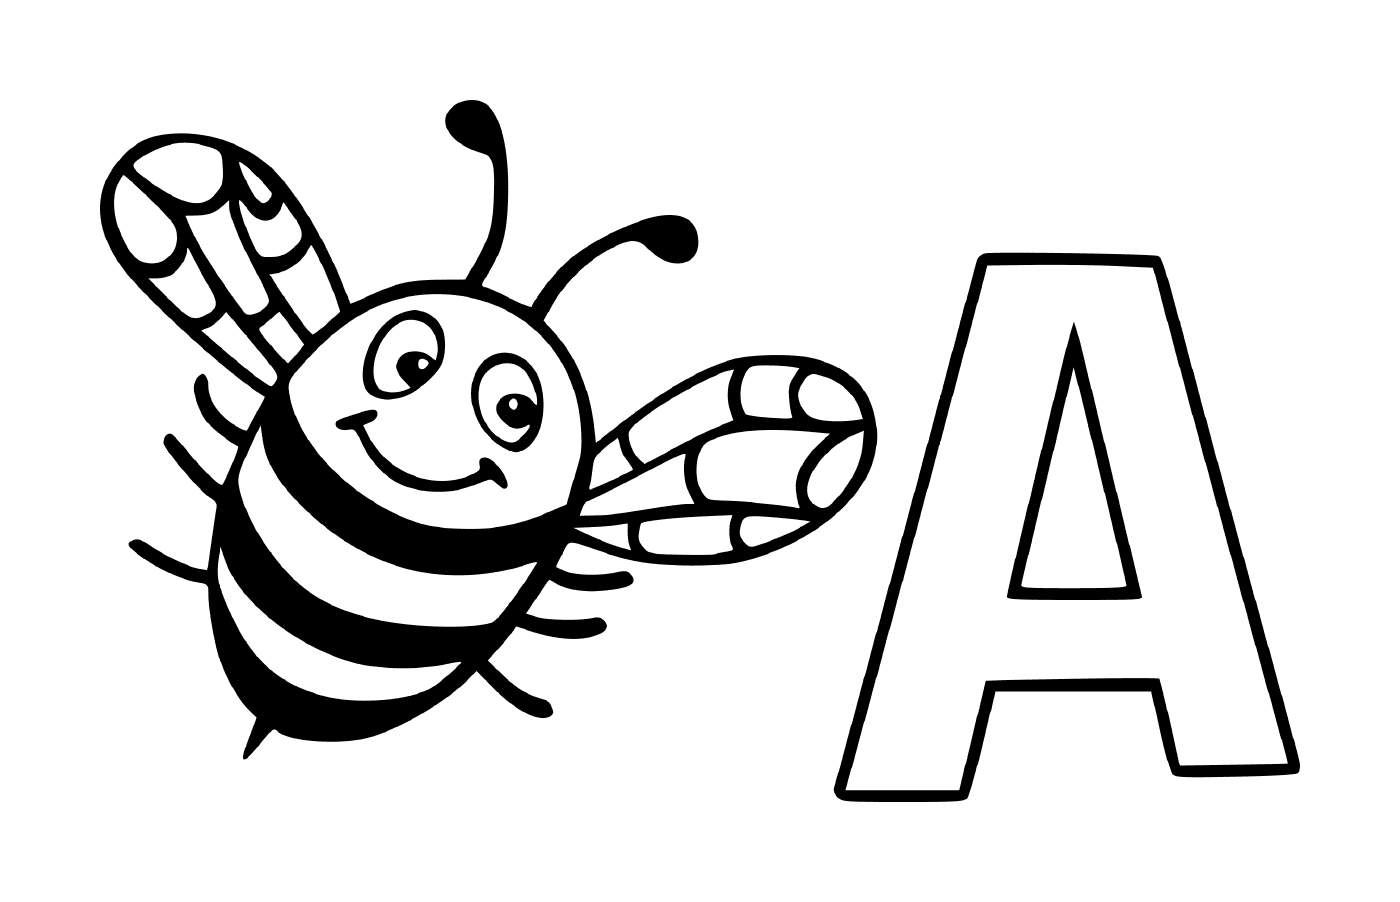  Letter A with a bee 